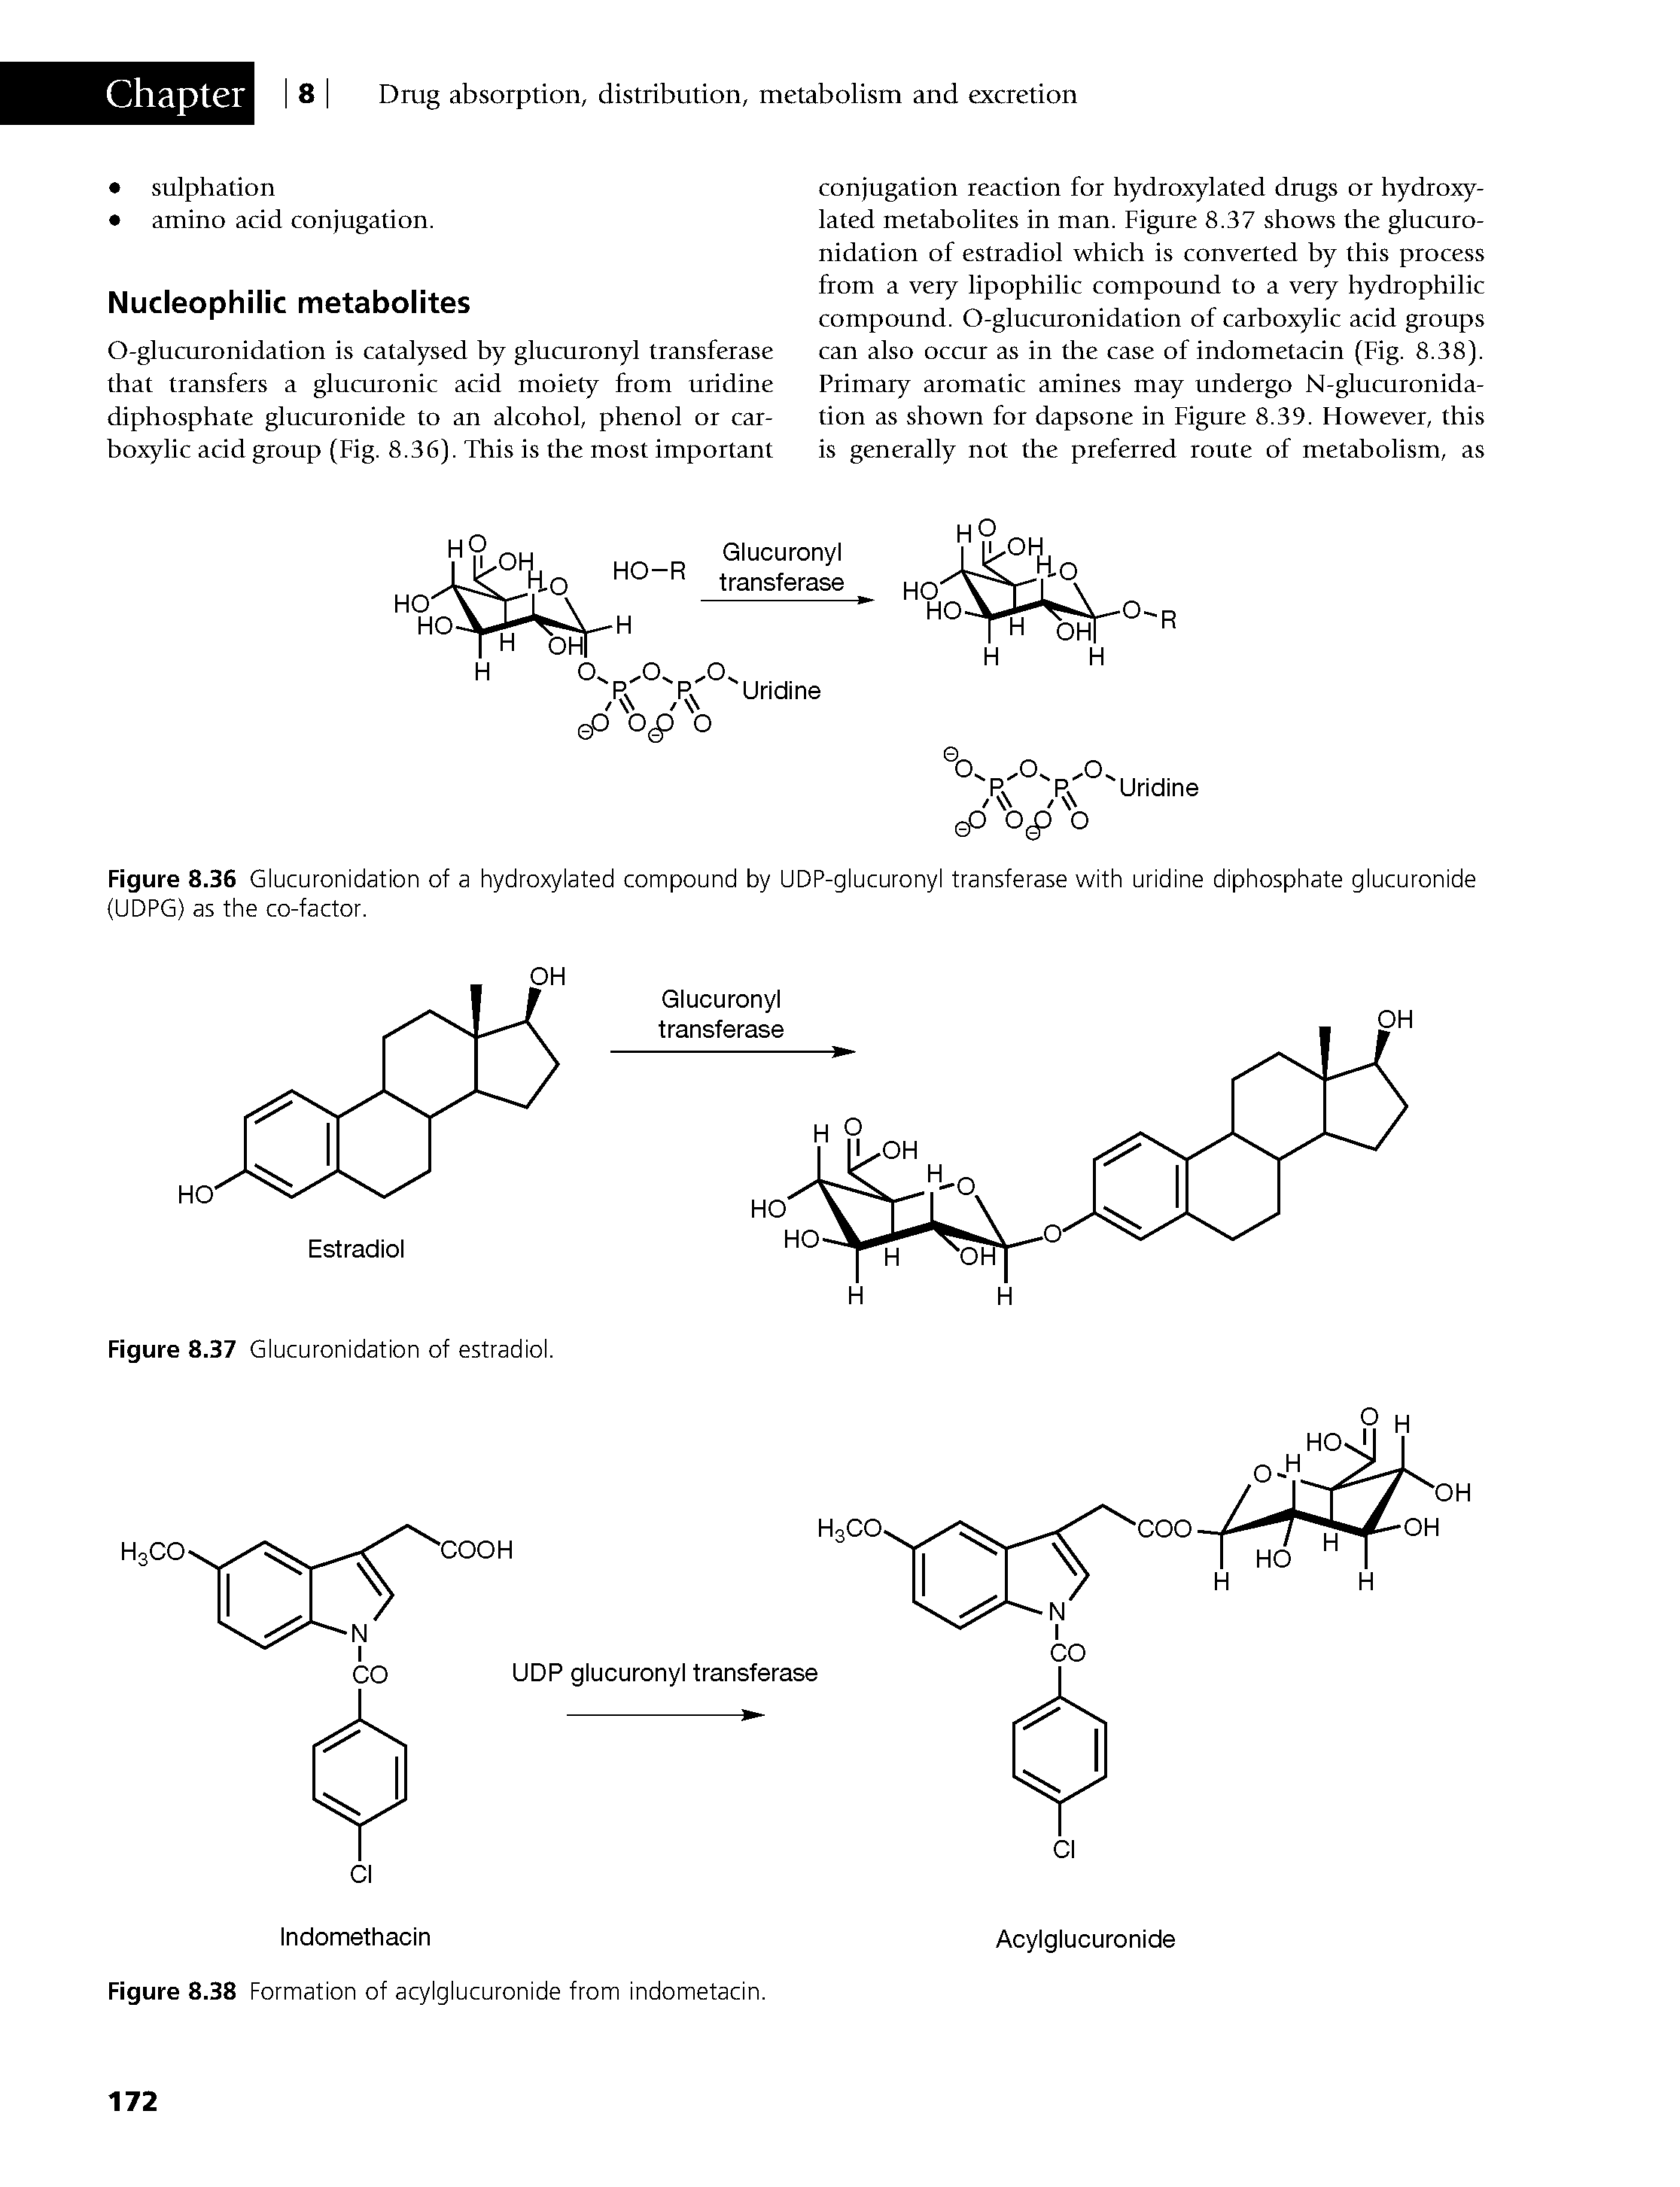 Figure 8.36 Glucuronidation of a hydroxylated compound by UDP-glucuronyl transferase with uridine diphosphate glucuronide (UDPG) as the co-factor.